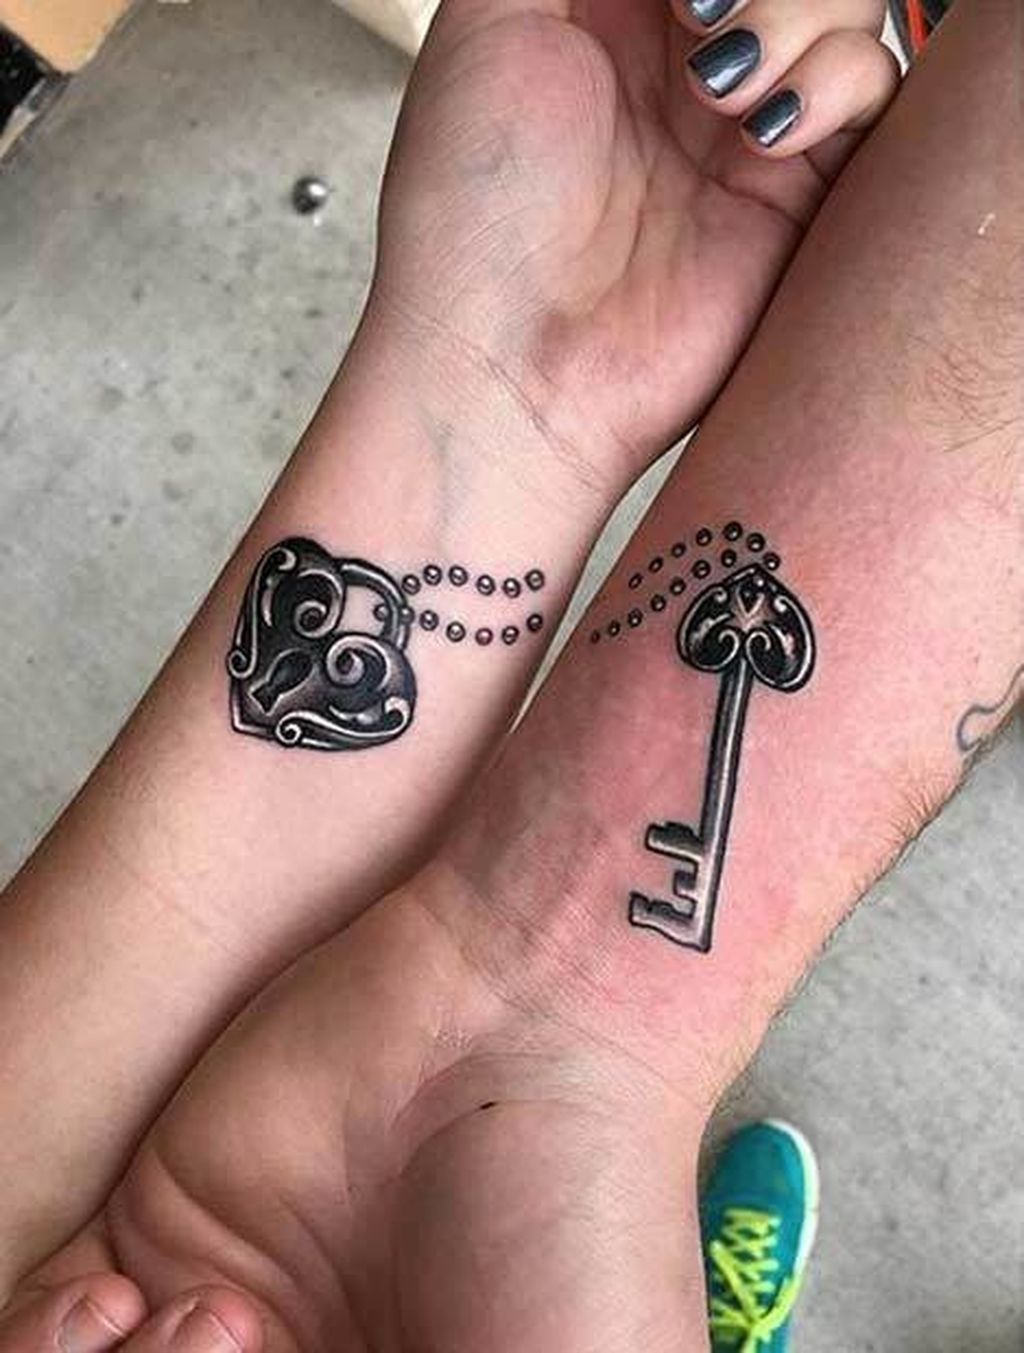 10 Matching Couple Tattoo Ideas To Declare Your Love!